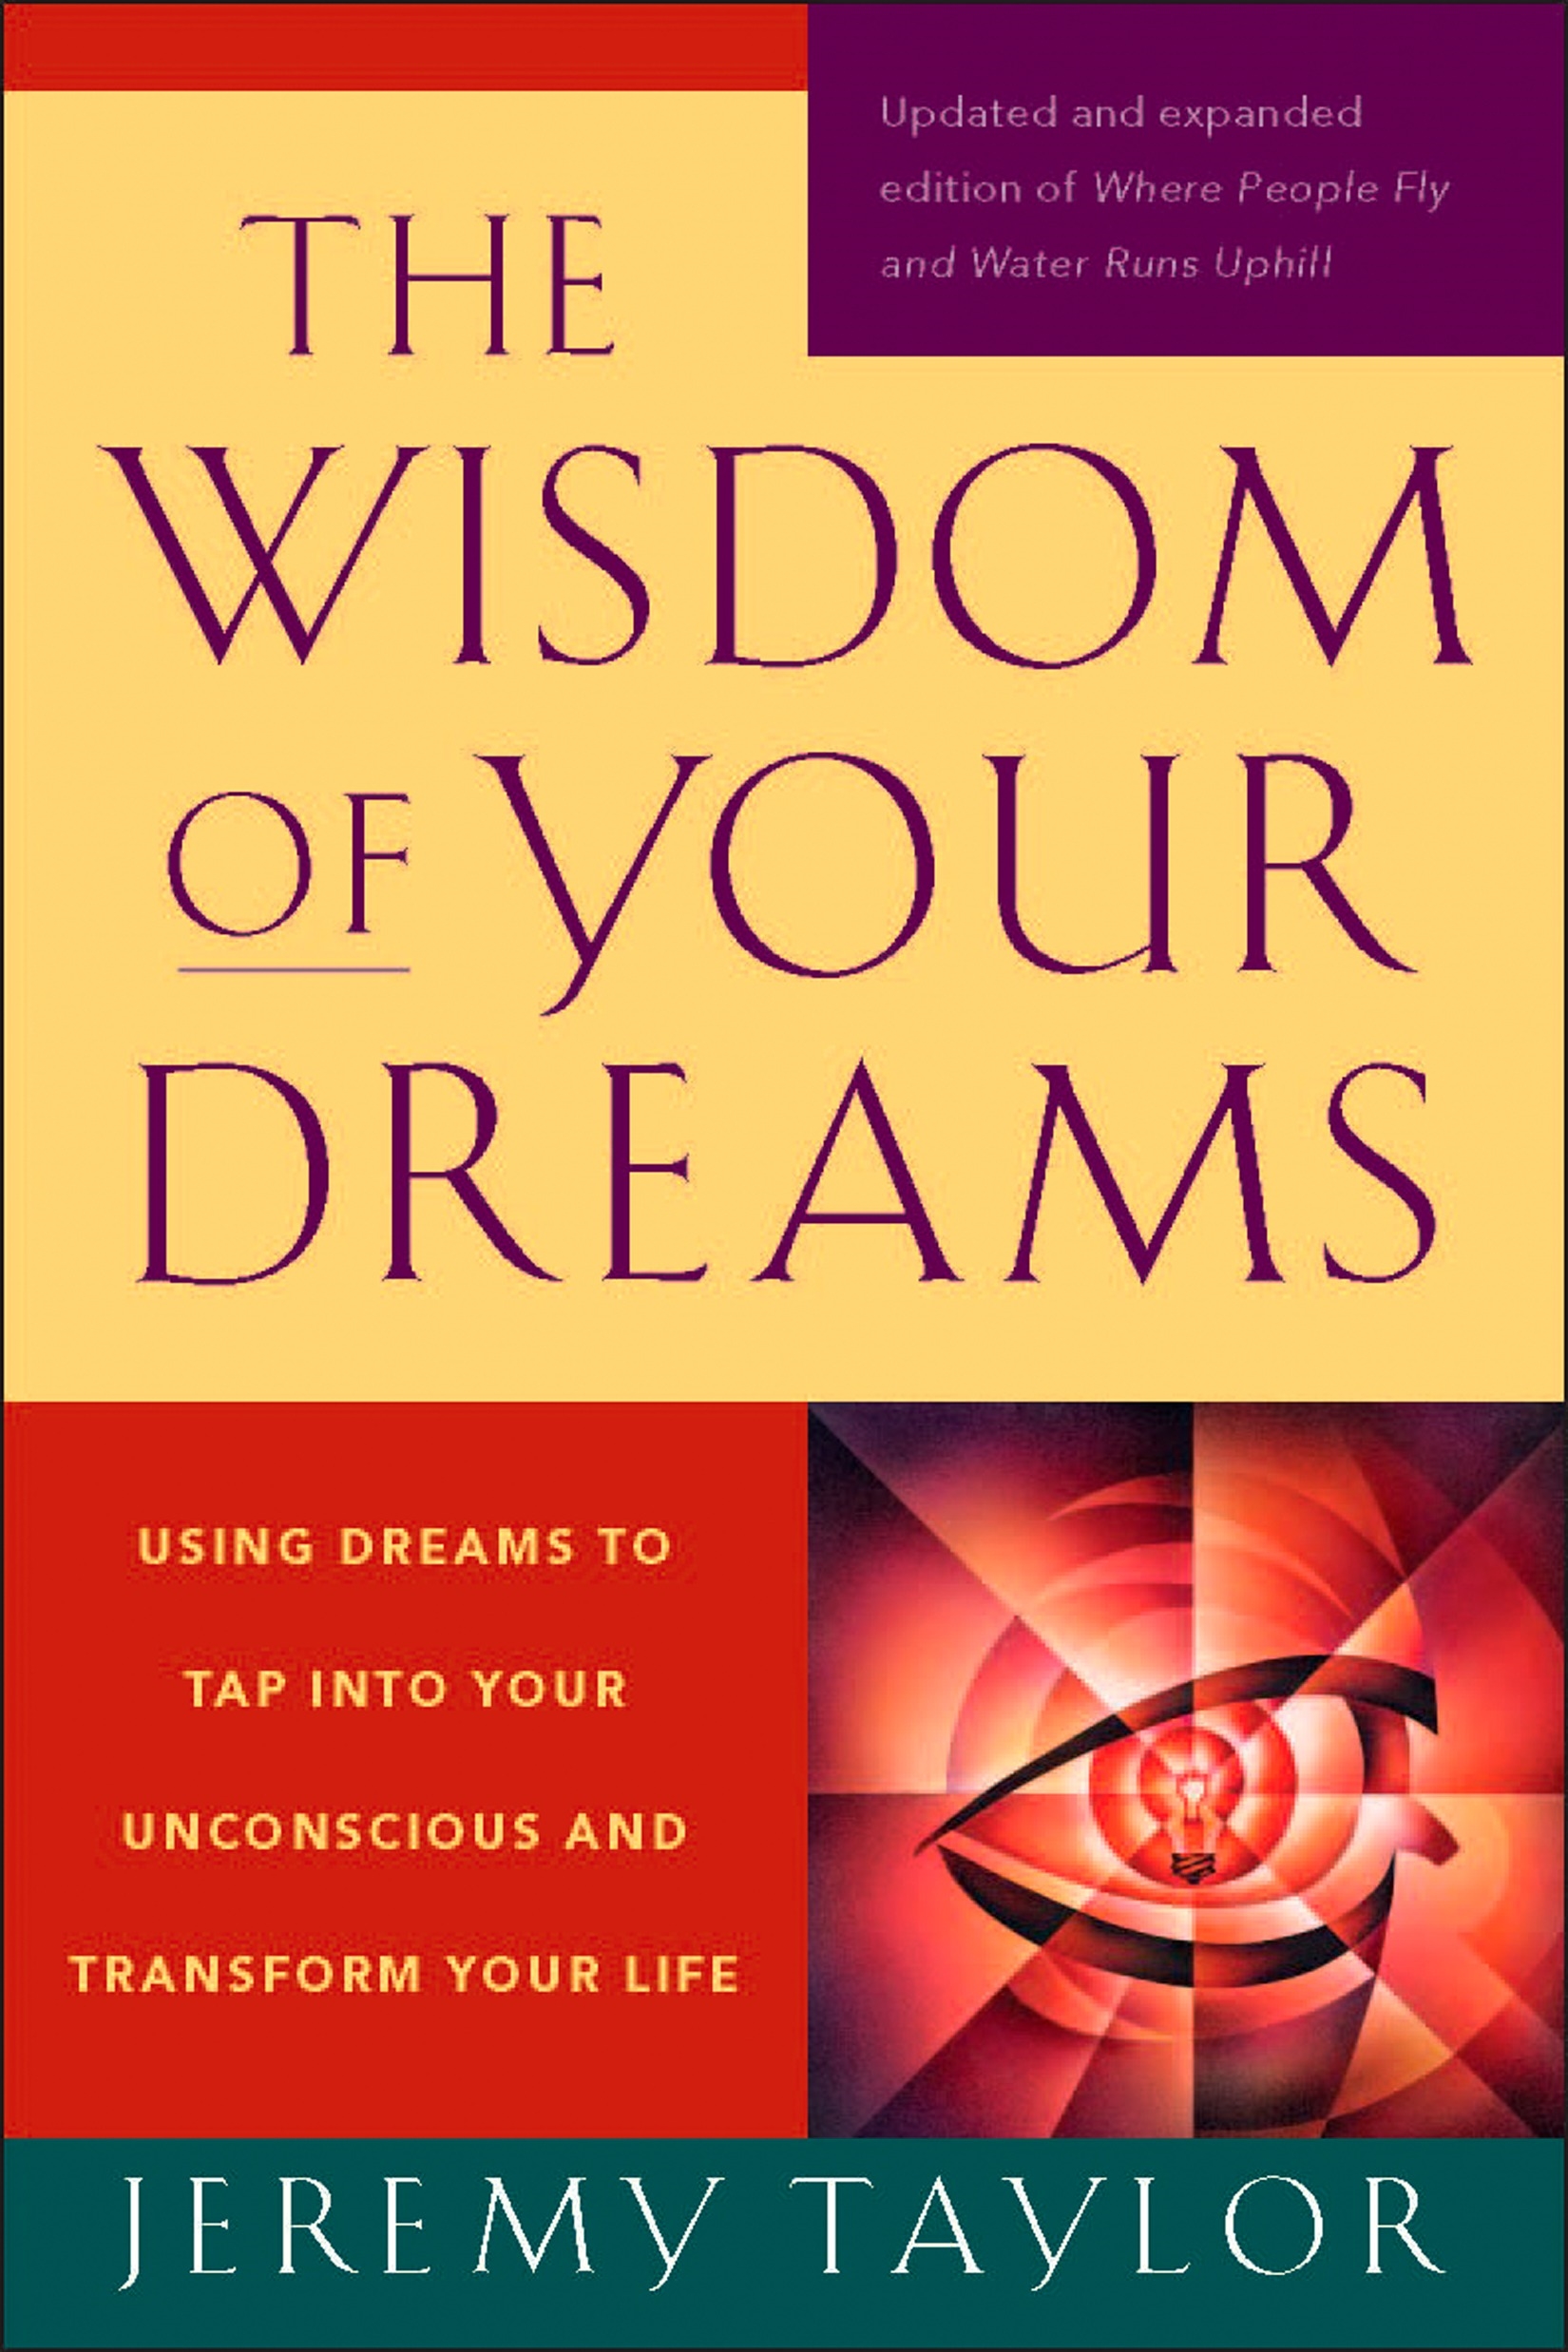 research on dreams books